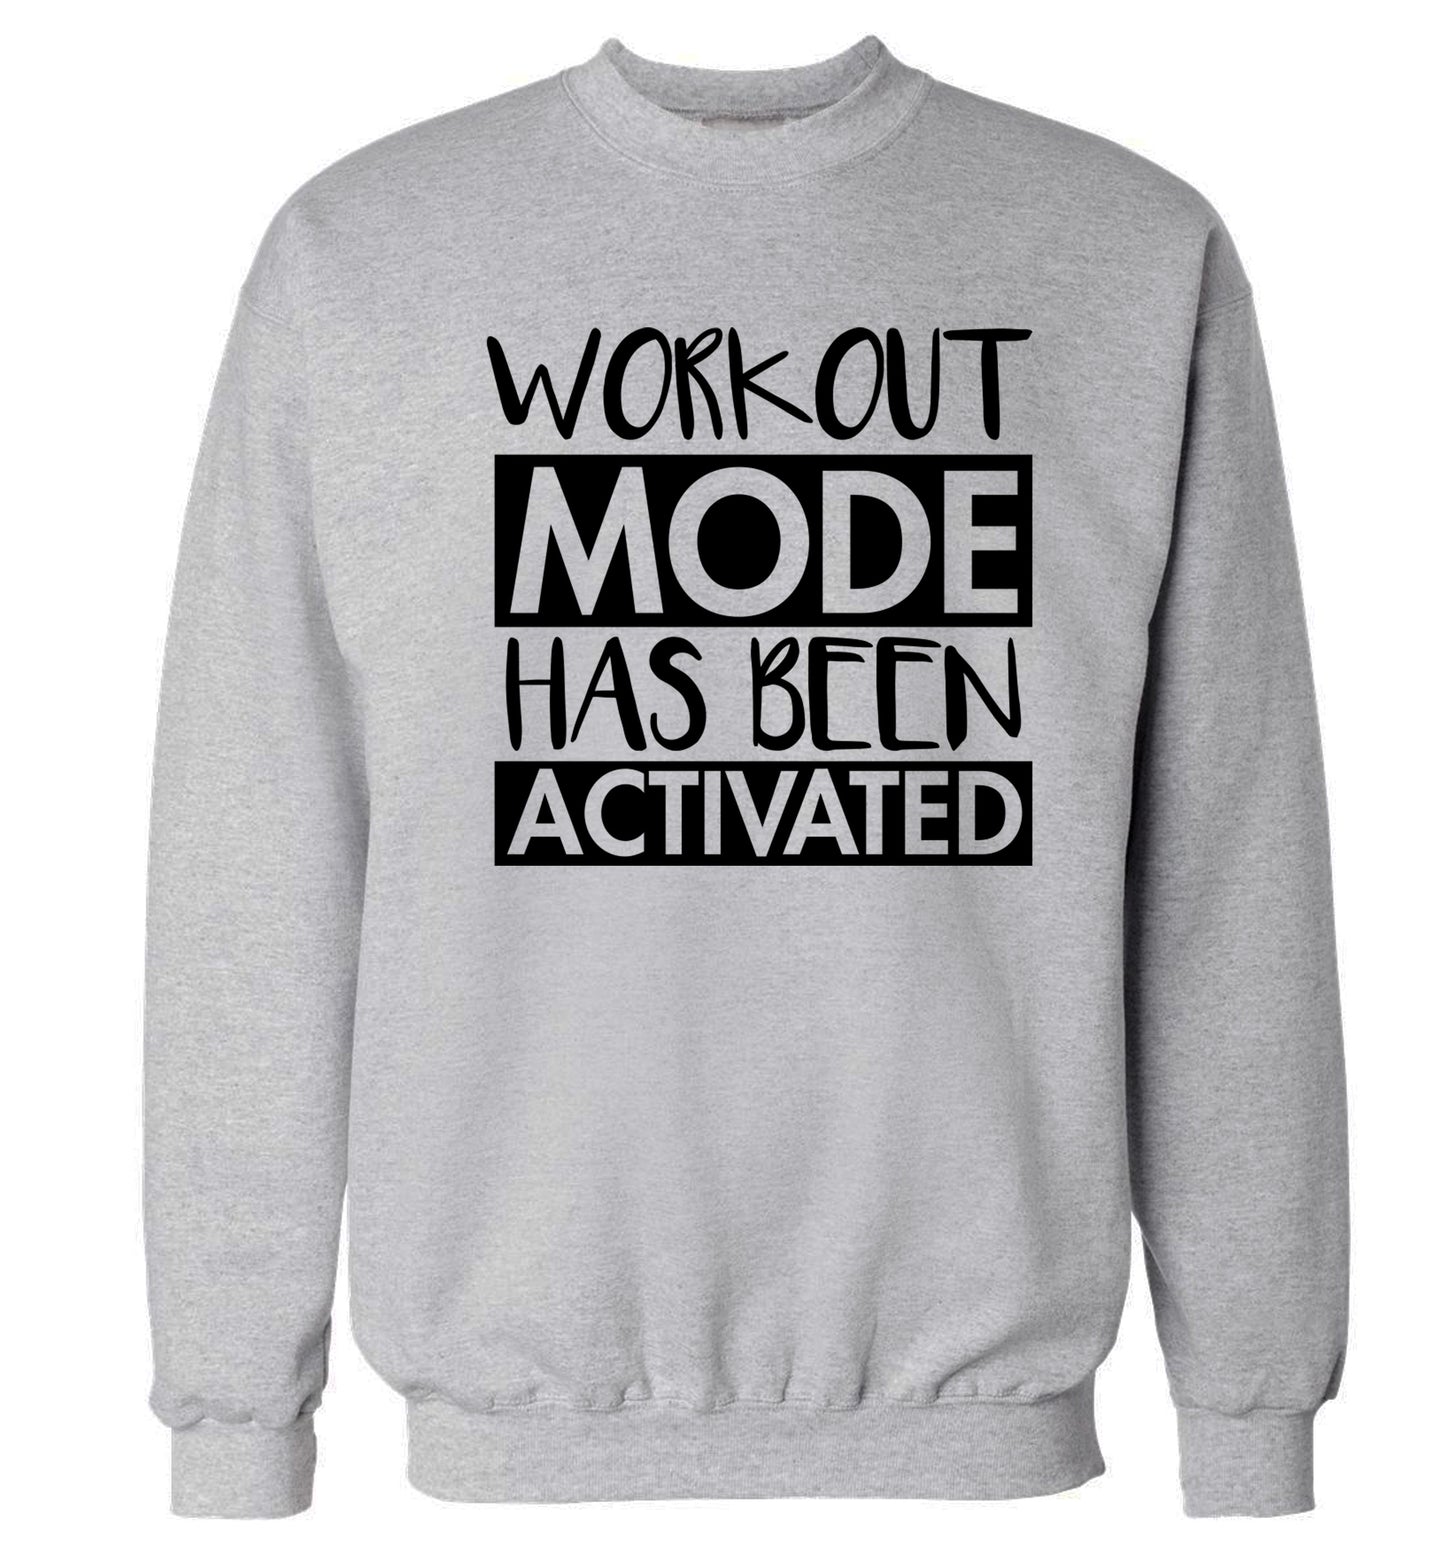 Workout mode has been activated Adult's unisex grey Sweater 2XL